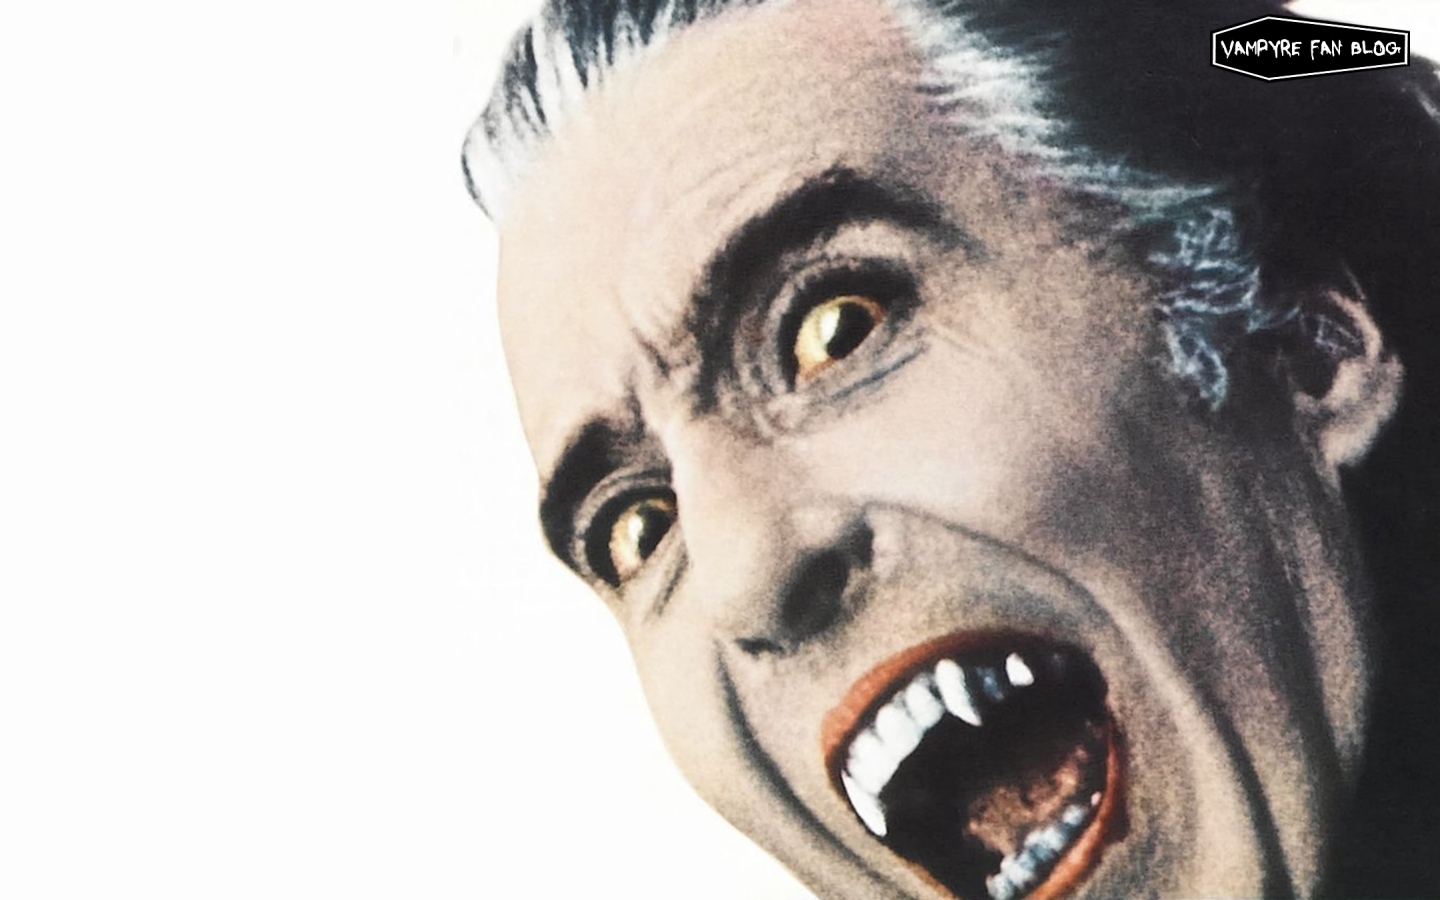 Vampire Wallpaper Background Actor Christopher Lee As Count Dracula